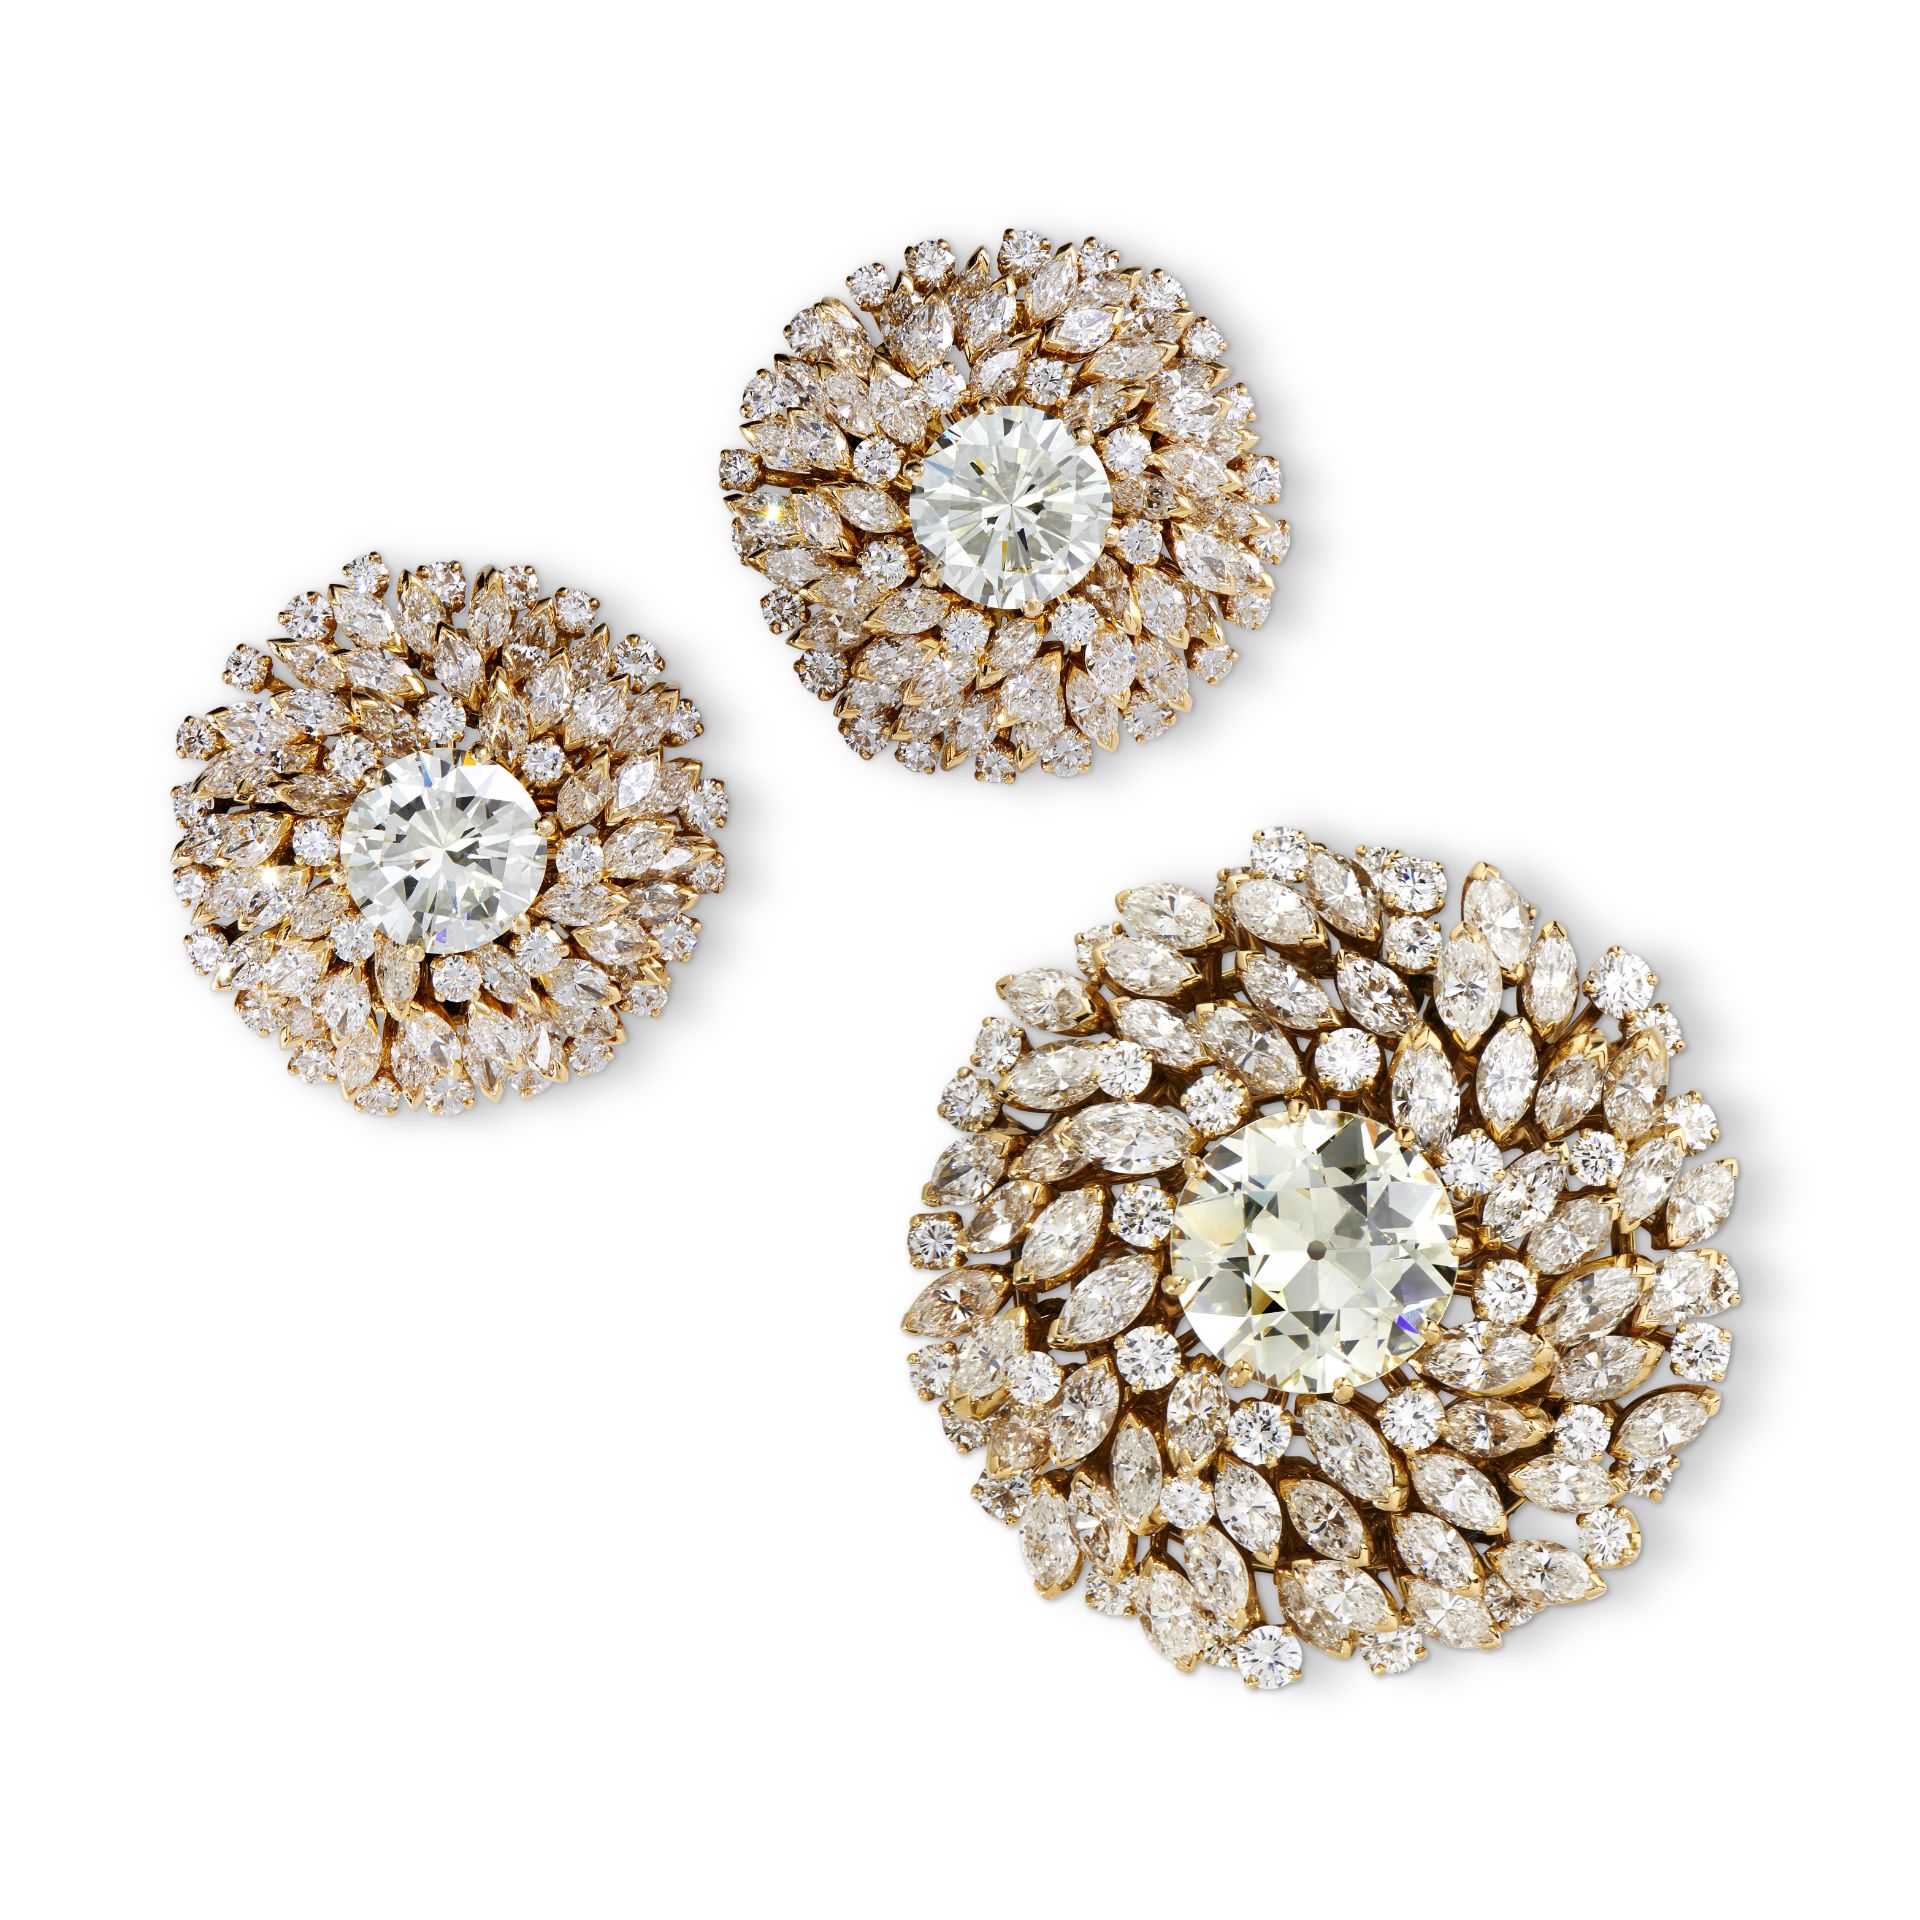 BULGARI, AN IMPORTANT DIAMOND BROOCH AND EARRINGS SUITE in 18ct yellow gold, each earring set wit...